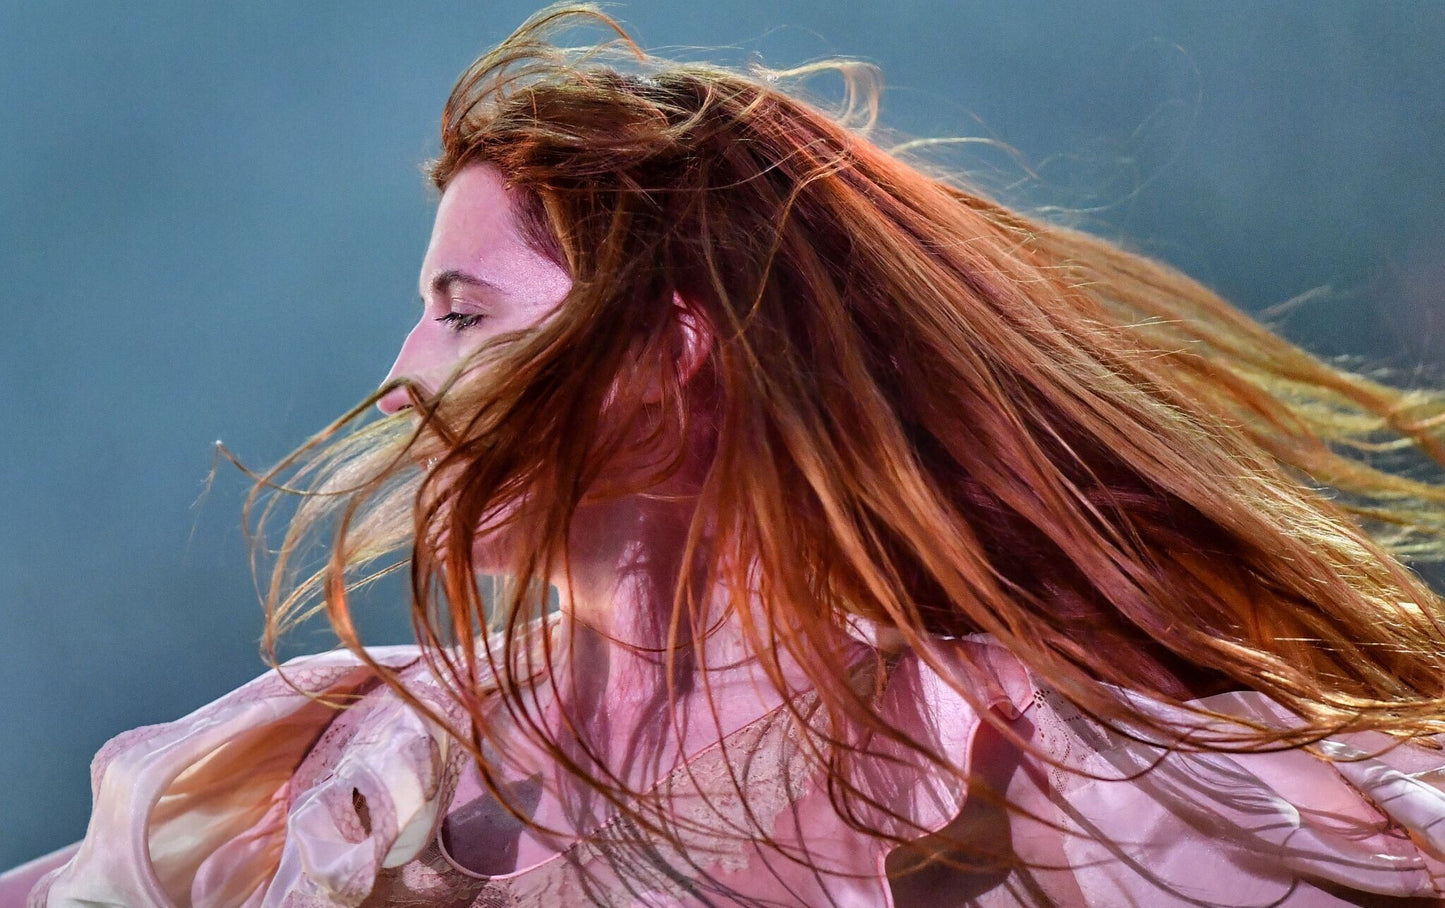 Florence and the Machine - Florence Welch with Beautiful Long Red Hair On Stage, England, 2018 Poster